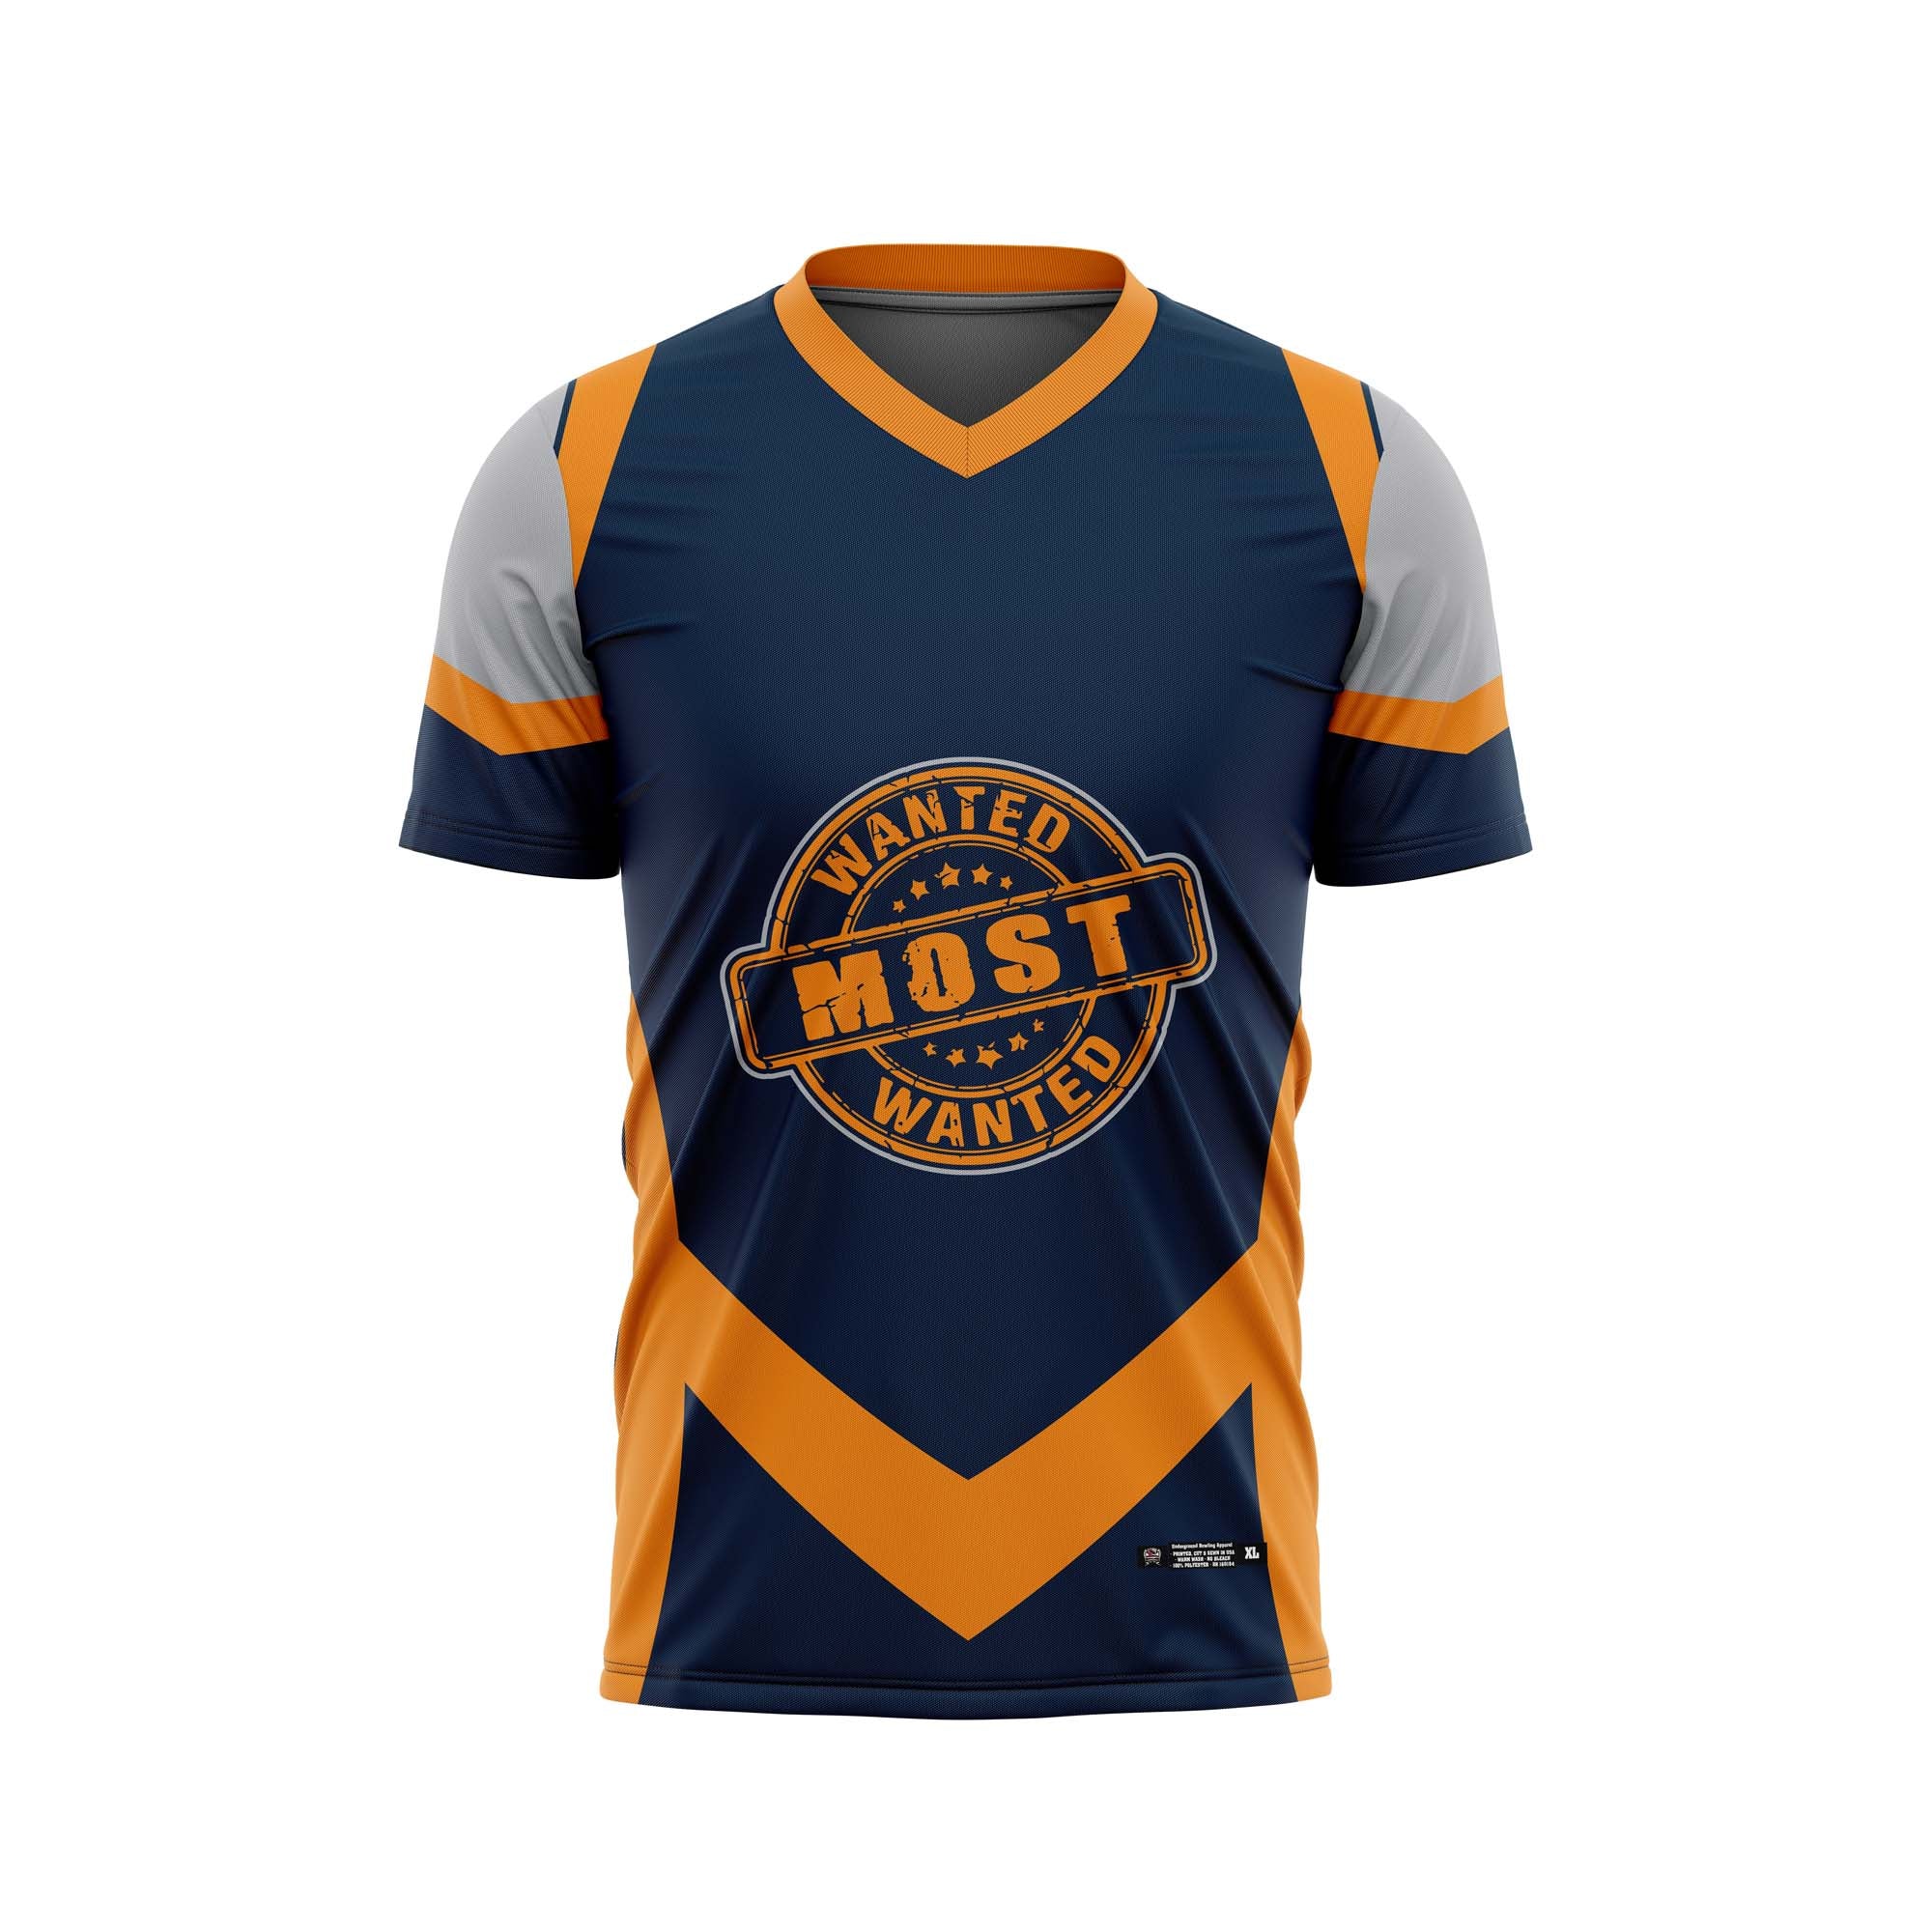 Most Wanted Navy Jersey